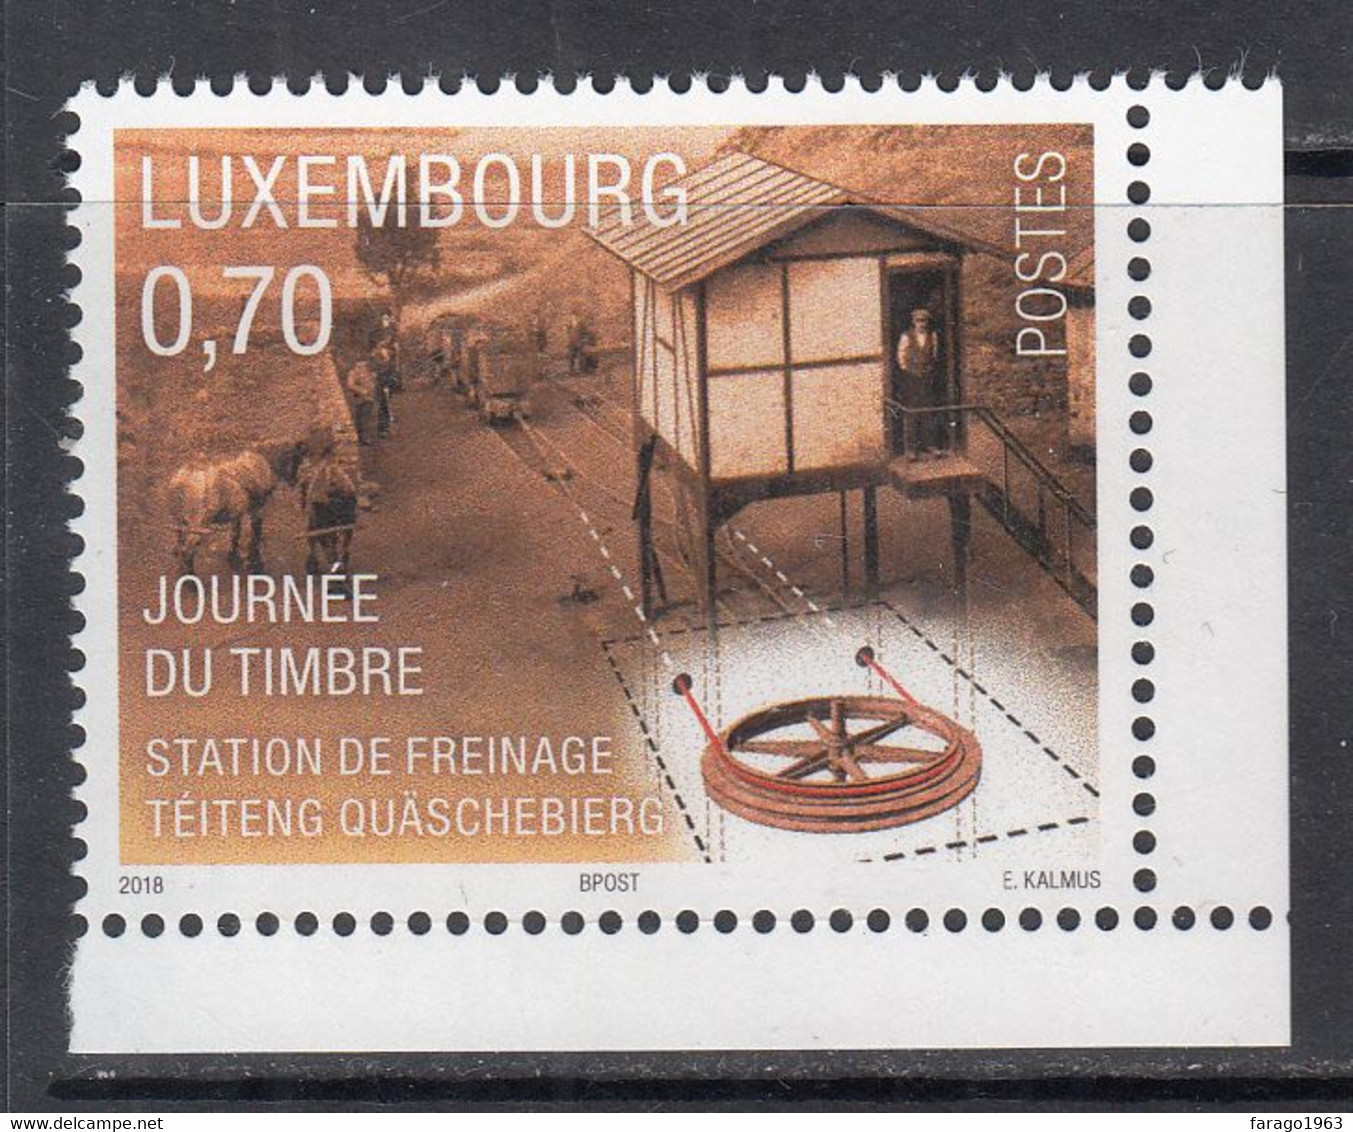 2018 Luxembourg Stamp Day Freinage Station Horses Railway Complete Set Of 1 MNH @ Below Face Value - Neufs